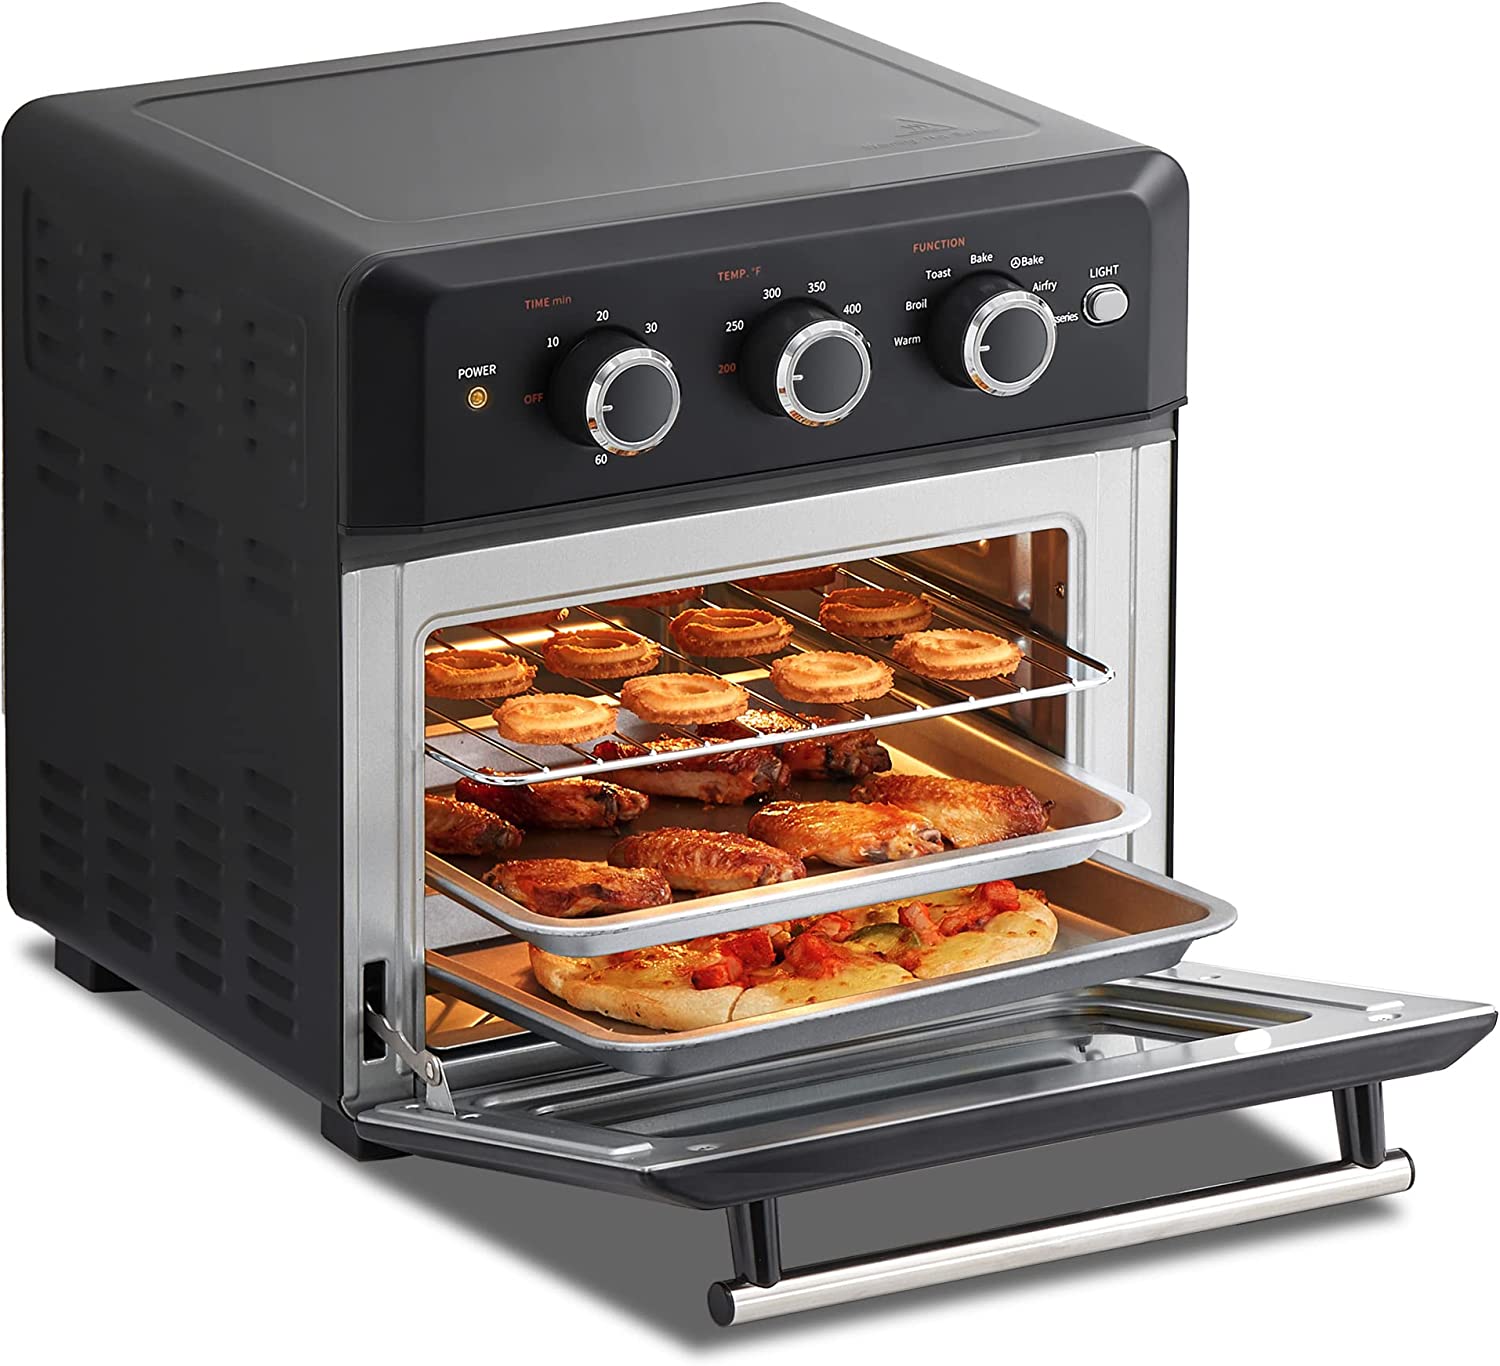 https://bigbigmart.com/wp-content/uploads/2023/06/COMFEE-Retro-Air-Fry-Toaster-Oven-7-in-1-1500W-19QT-Capacity-6-Slice-Air-Fry-Rotisseries-Warm-Broil-Toast-Bake-Convection-Bake-Black-Perfect-for-Countertop.jpg